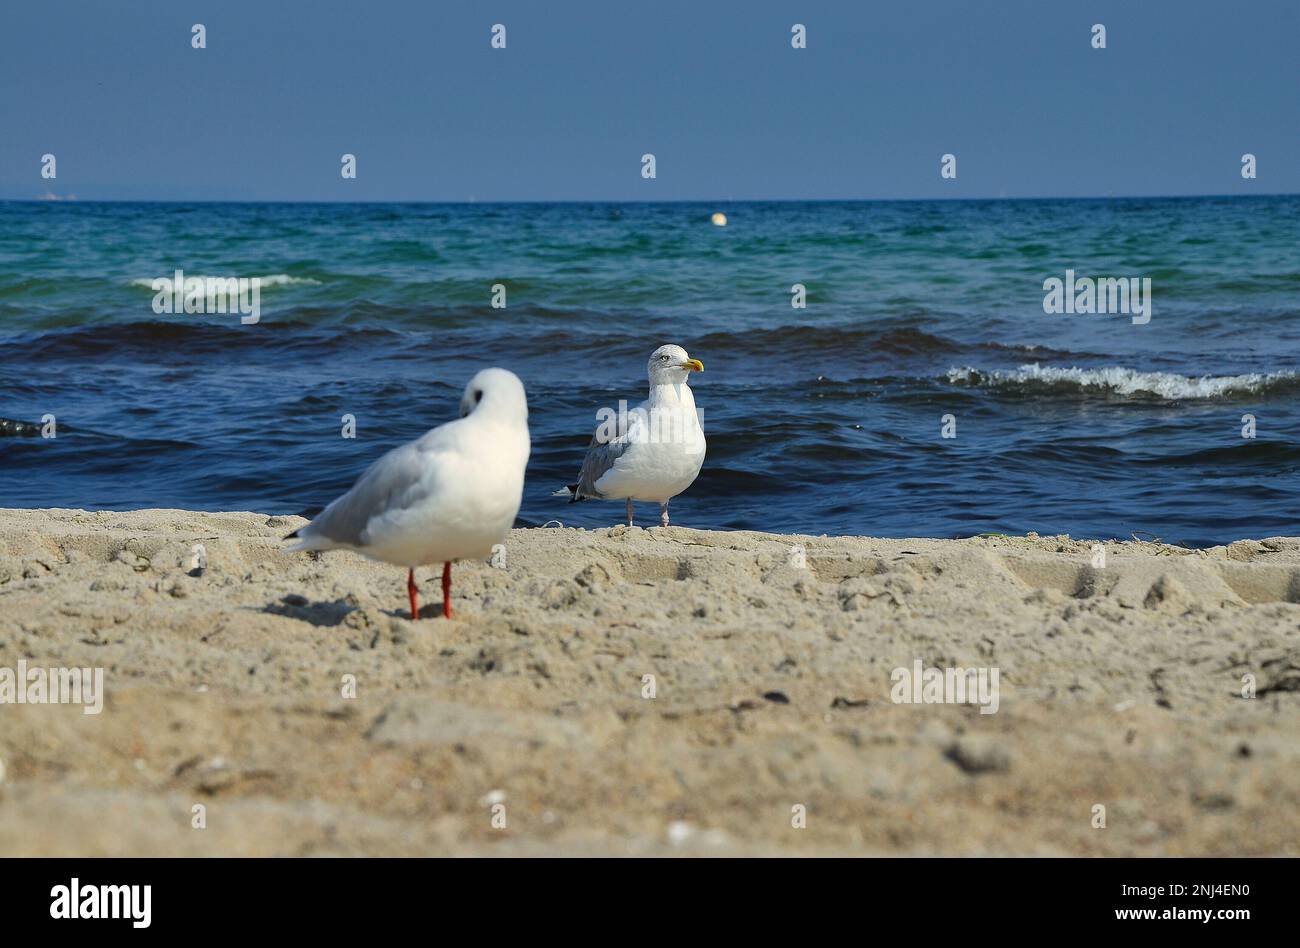 Full body shot of two seagulls in the sand, sea in the background. Stock Photo